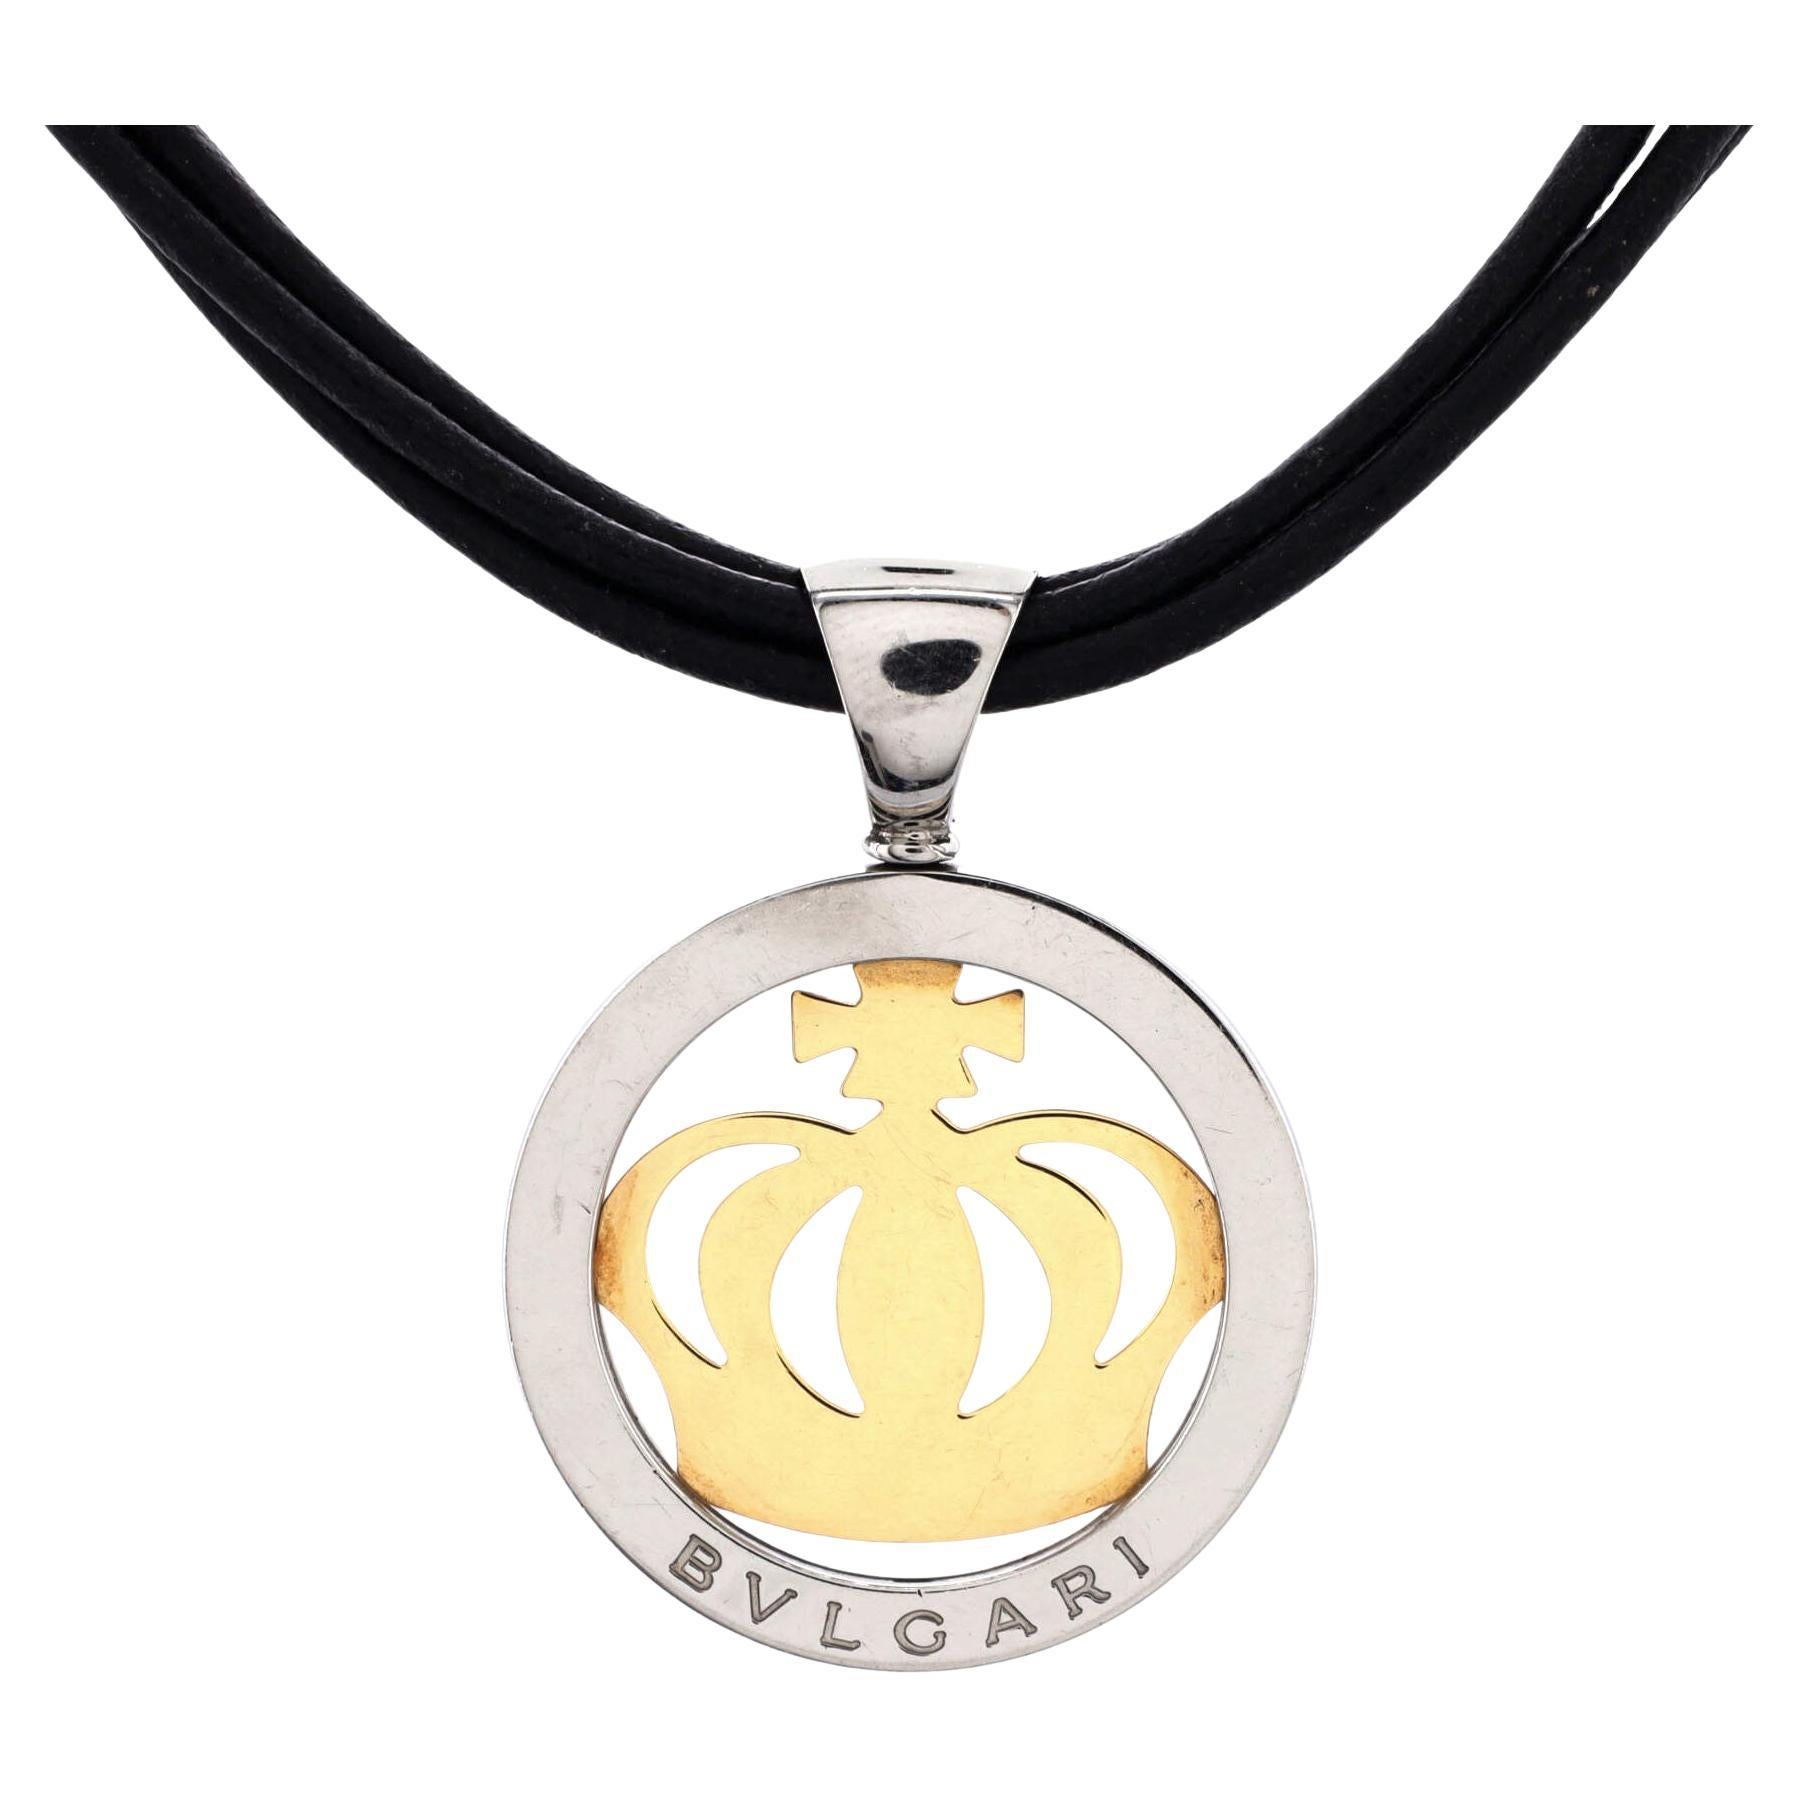 Bvlgari Tondo Crown Pendant Necklace Stainless Steel with 18k Yellow Gold